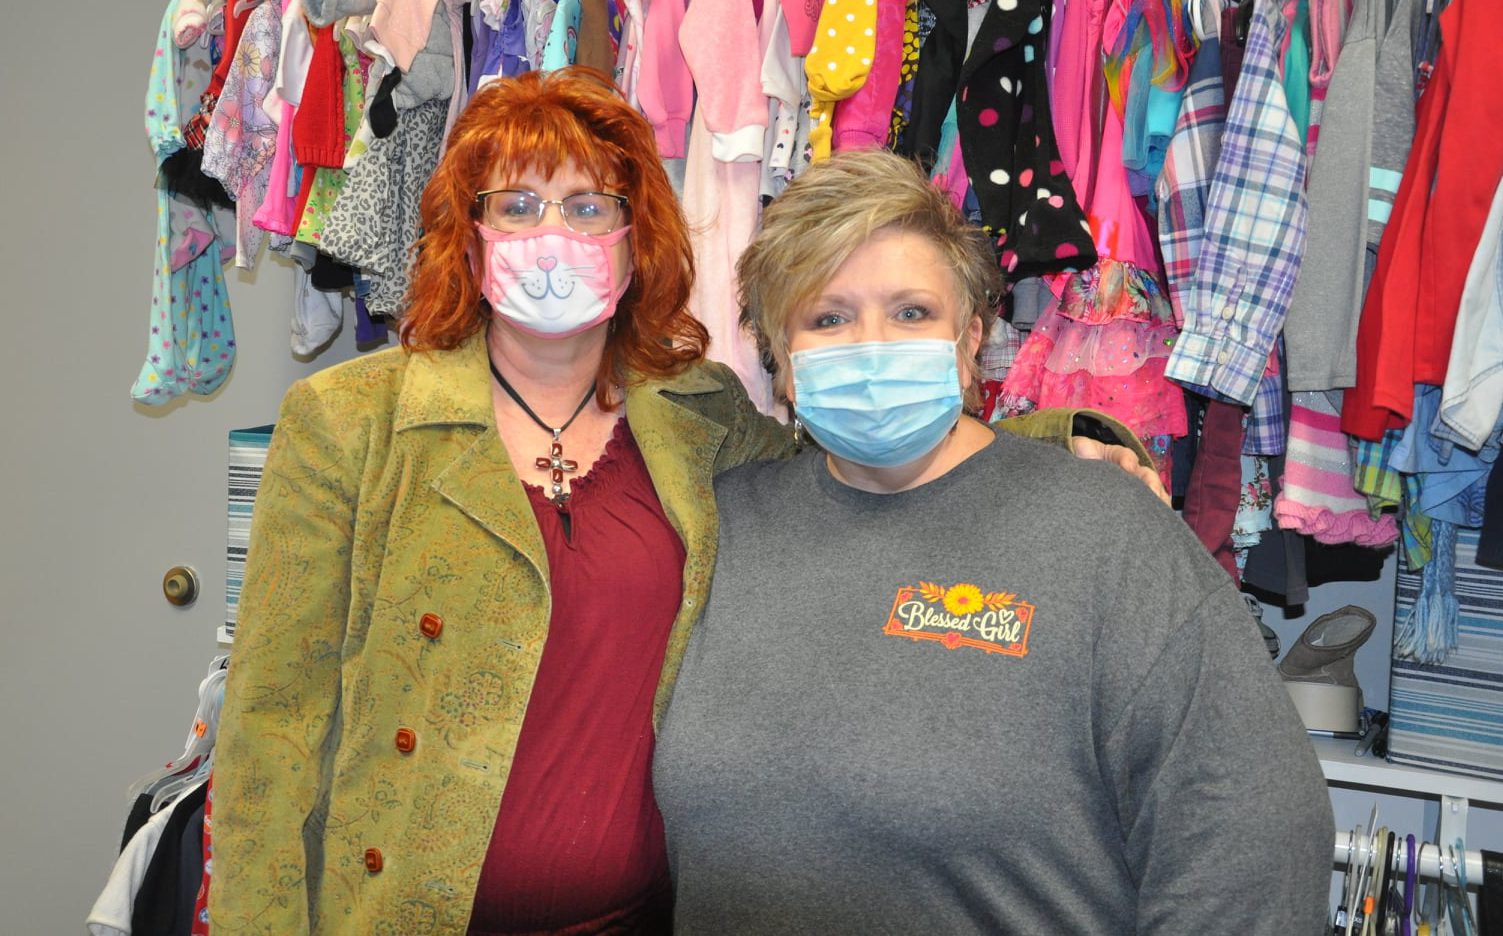 Two women wearing medical masks standing in front of racks of clothing